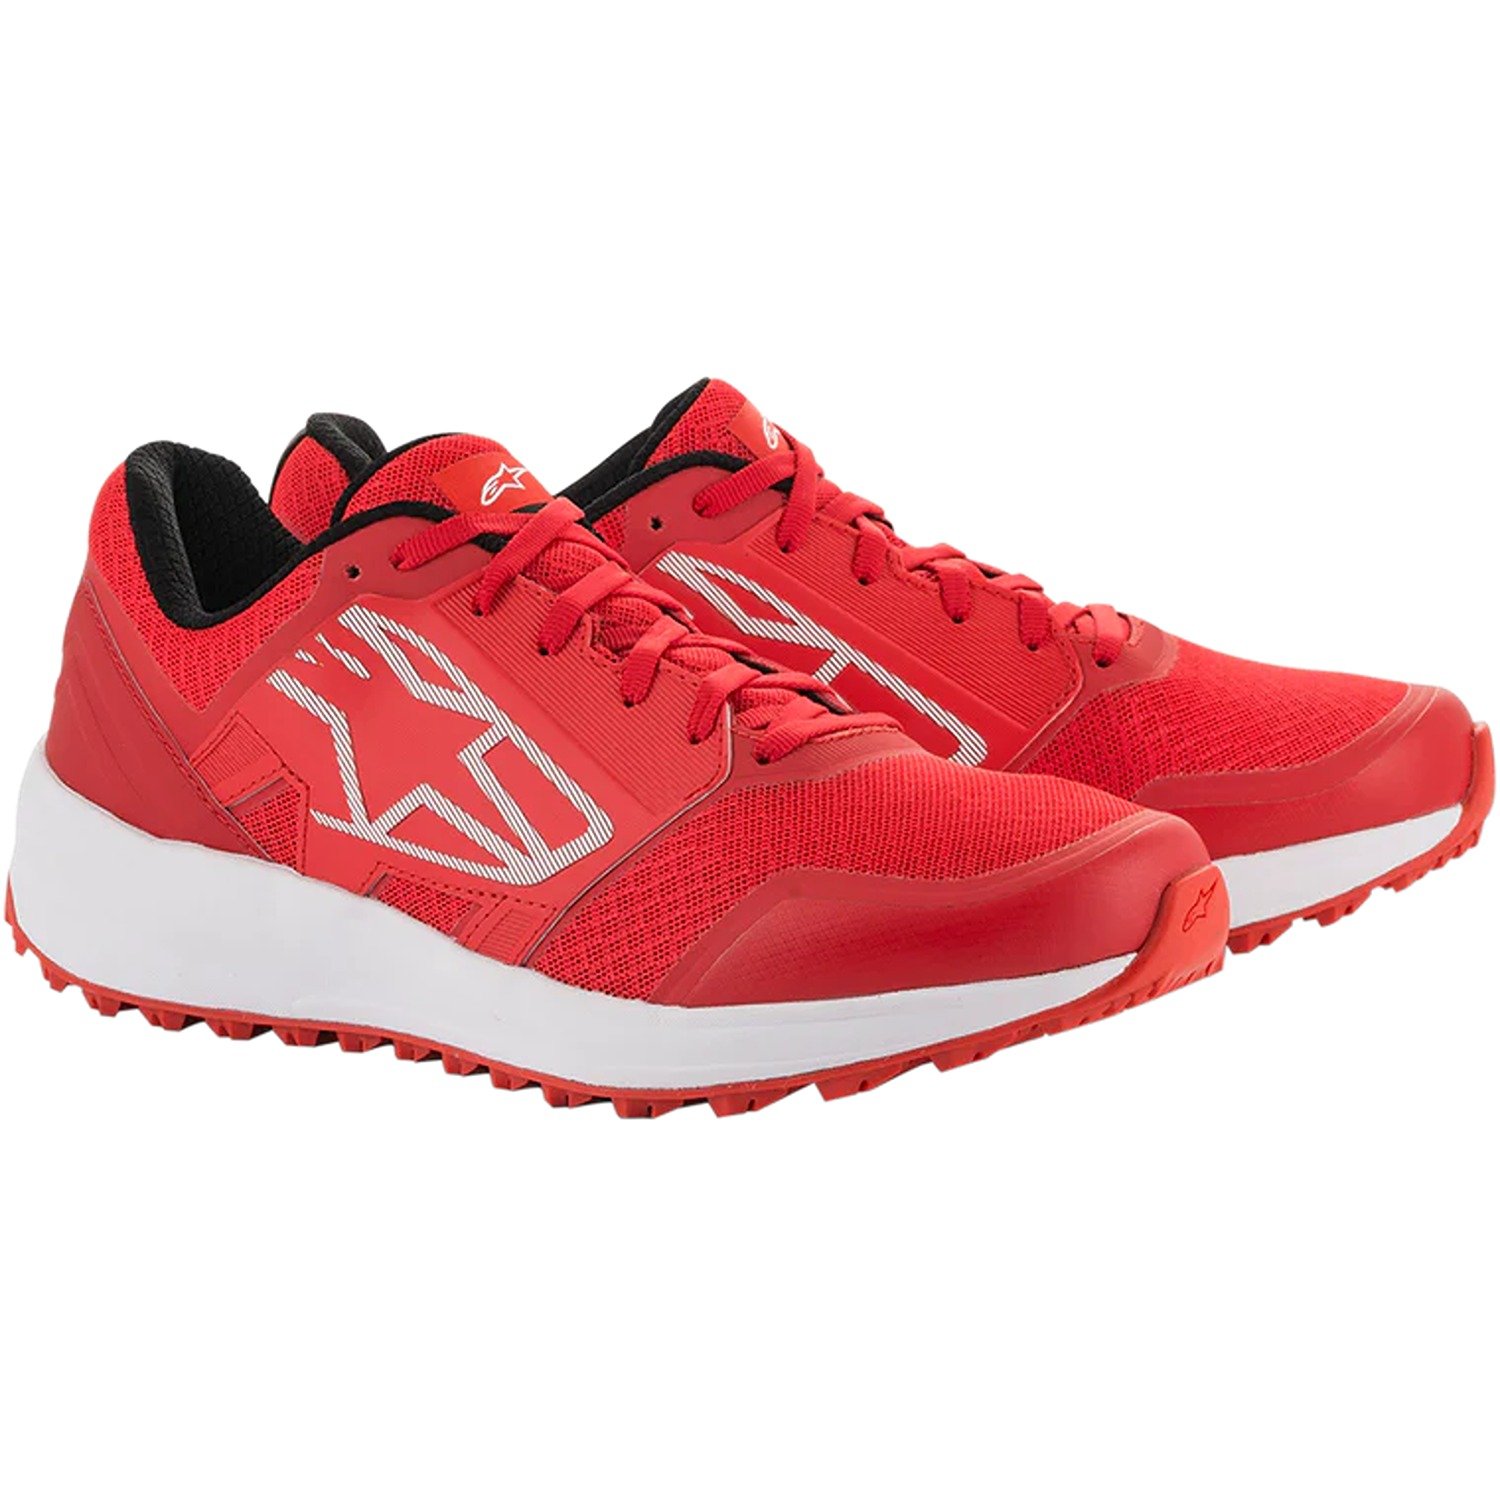 Image of Alpinestars Meta Trail Shoes Red White Taille US 4